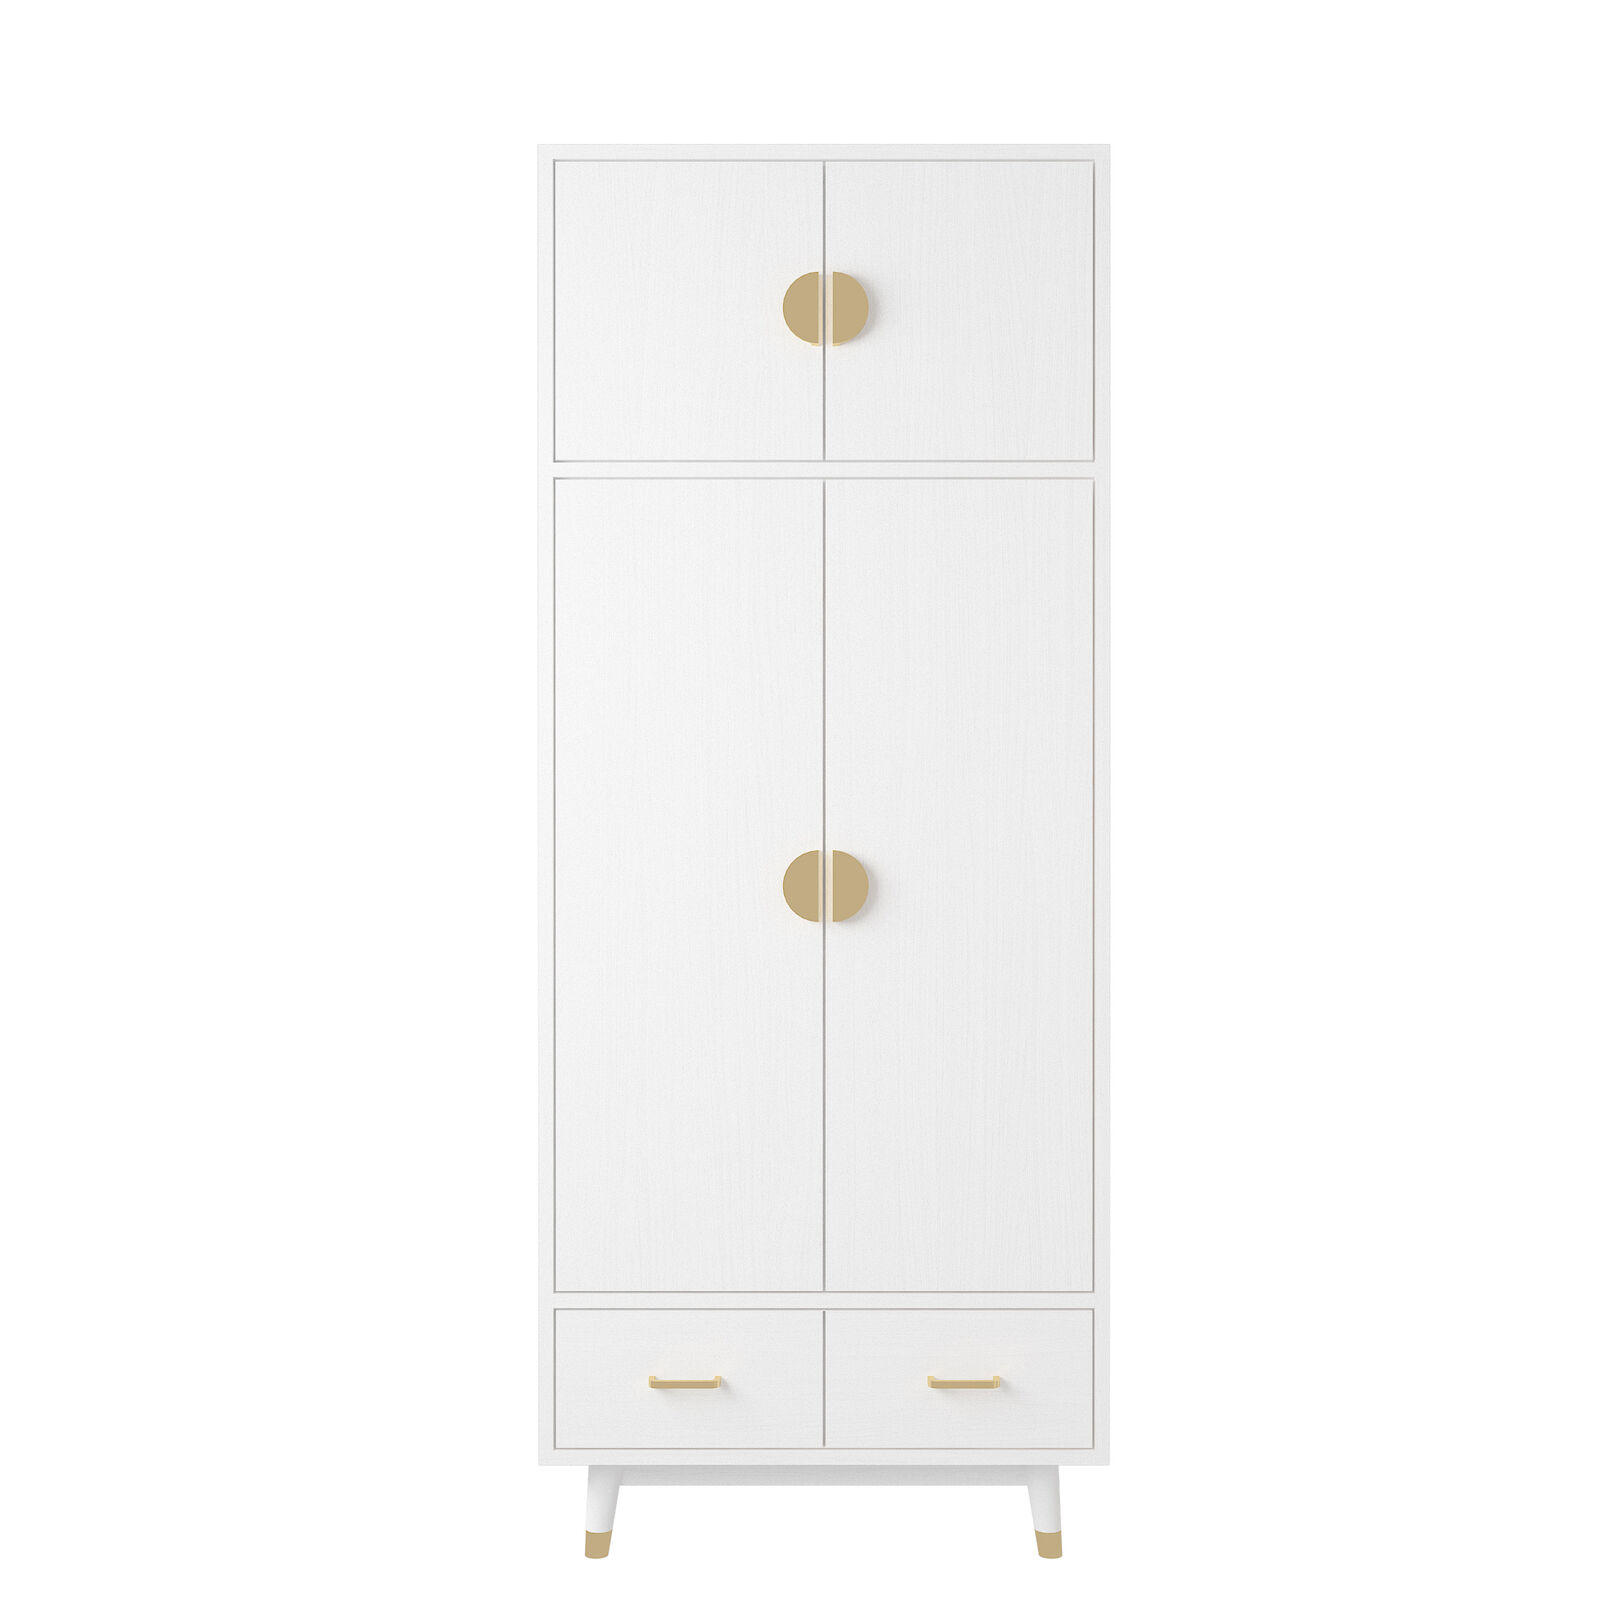 thinkstar Modern 4 Door Armoire Wardrobes With Clothing Rod And 2 Drawers Storage Cabinet